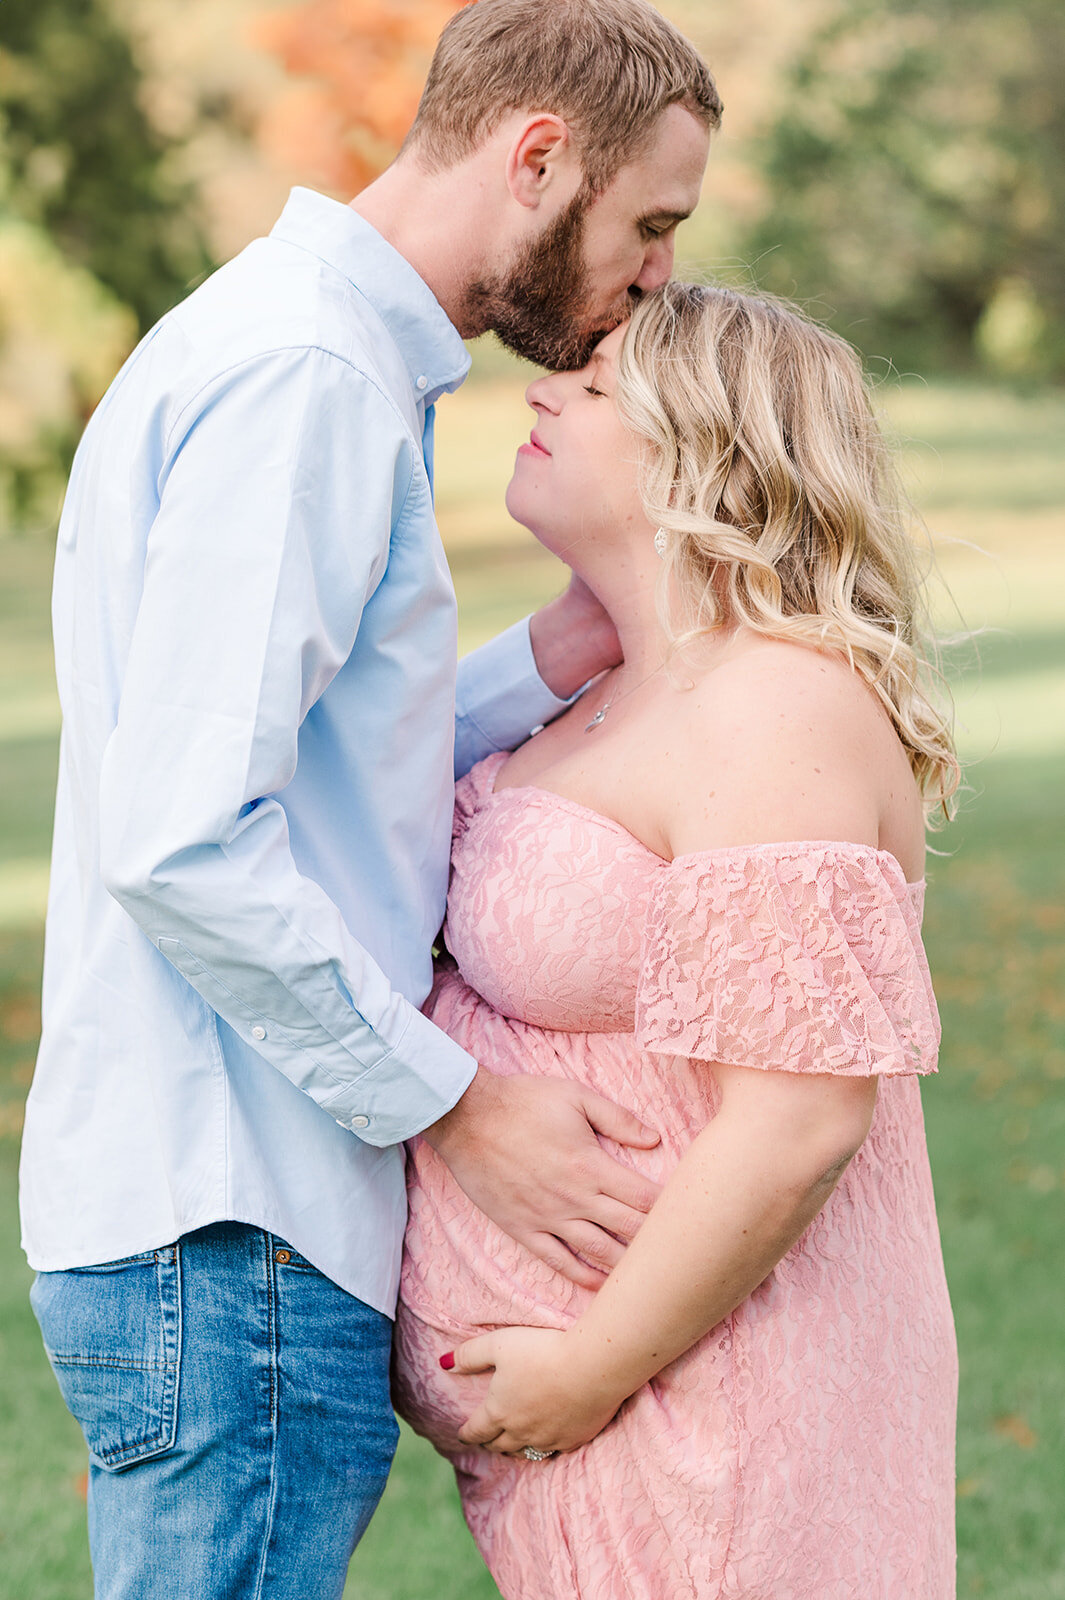 couple during maternity session in baltimore md park with dad kissing mom on the head and having a hand on her belly